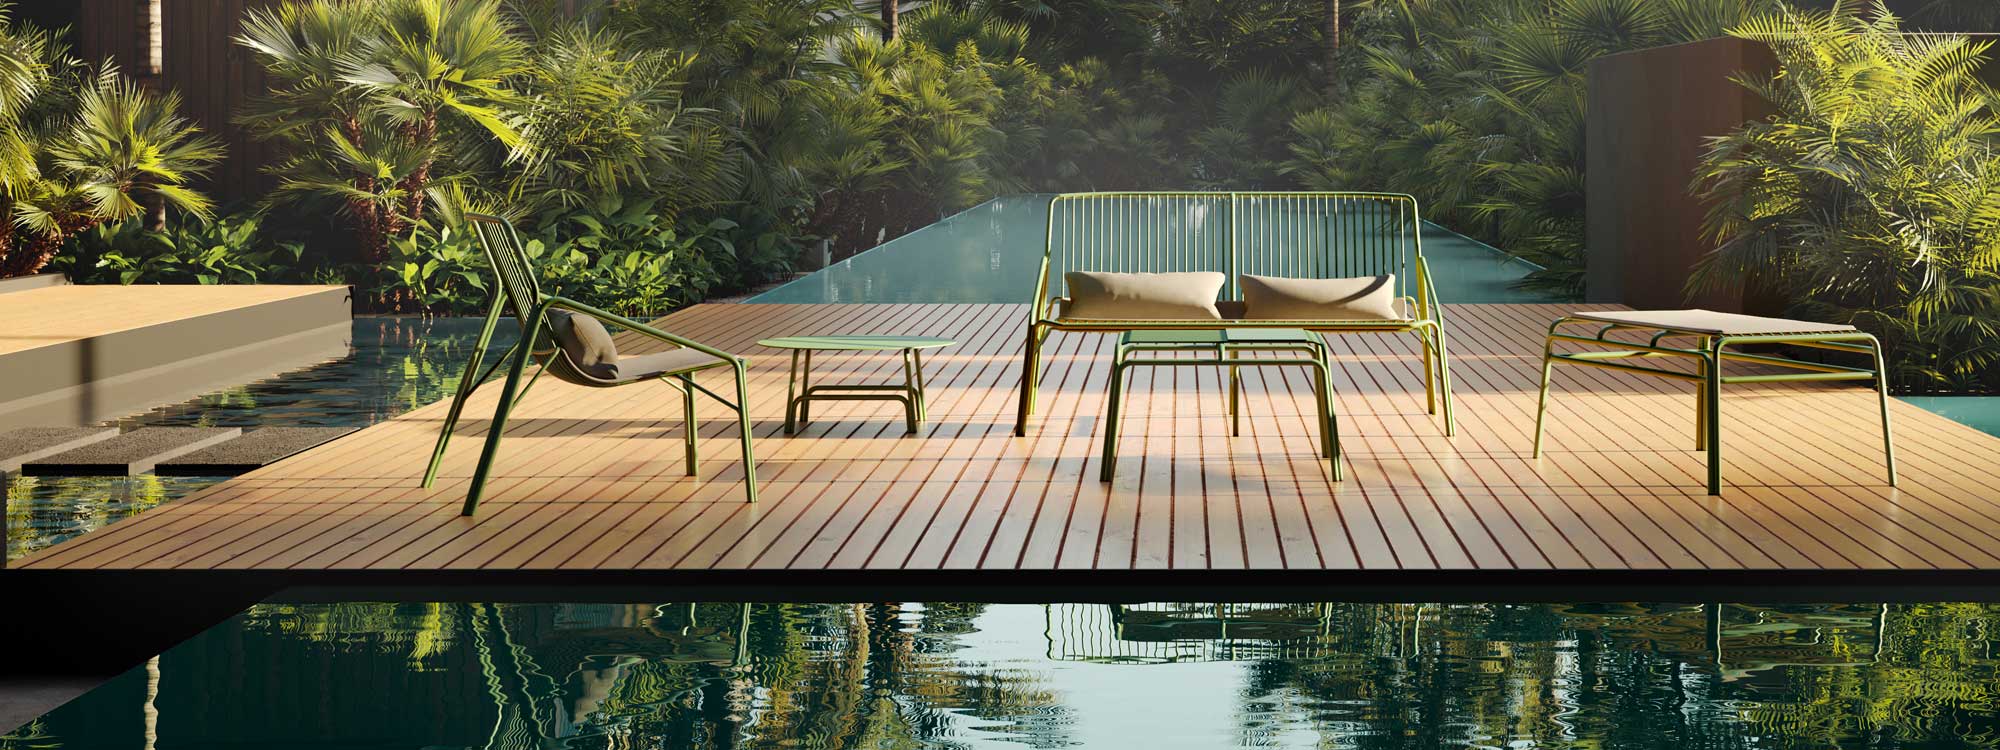 Image of Oiside No 12 green outdoor lounge furniture on wooden deck, surrounded by still water and exotic plants